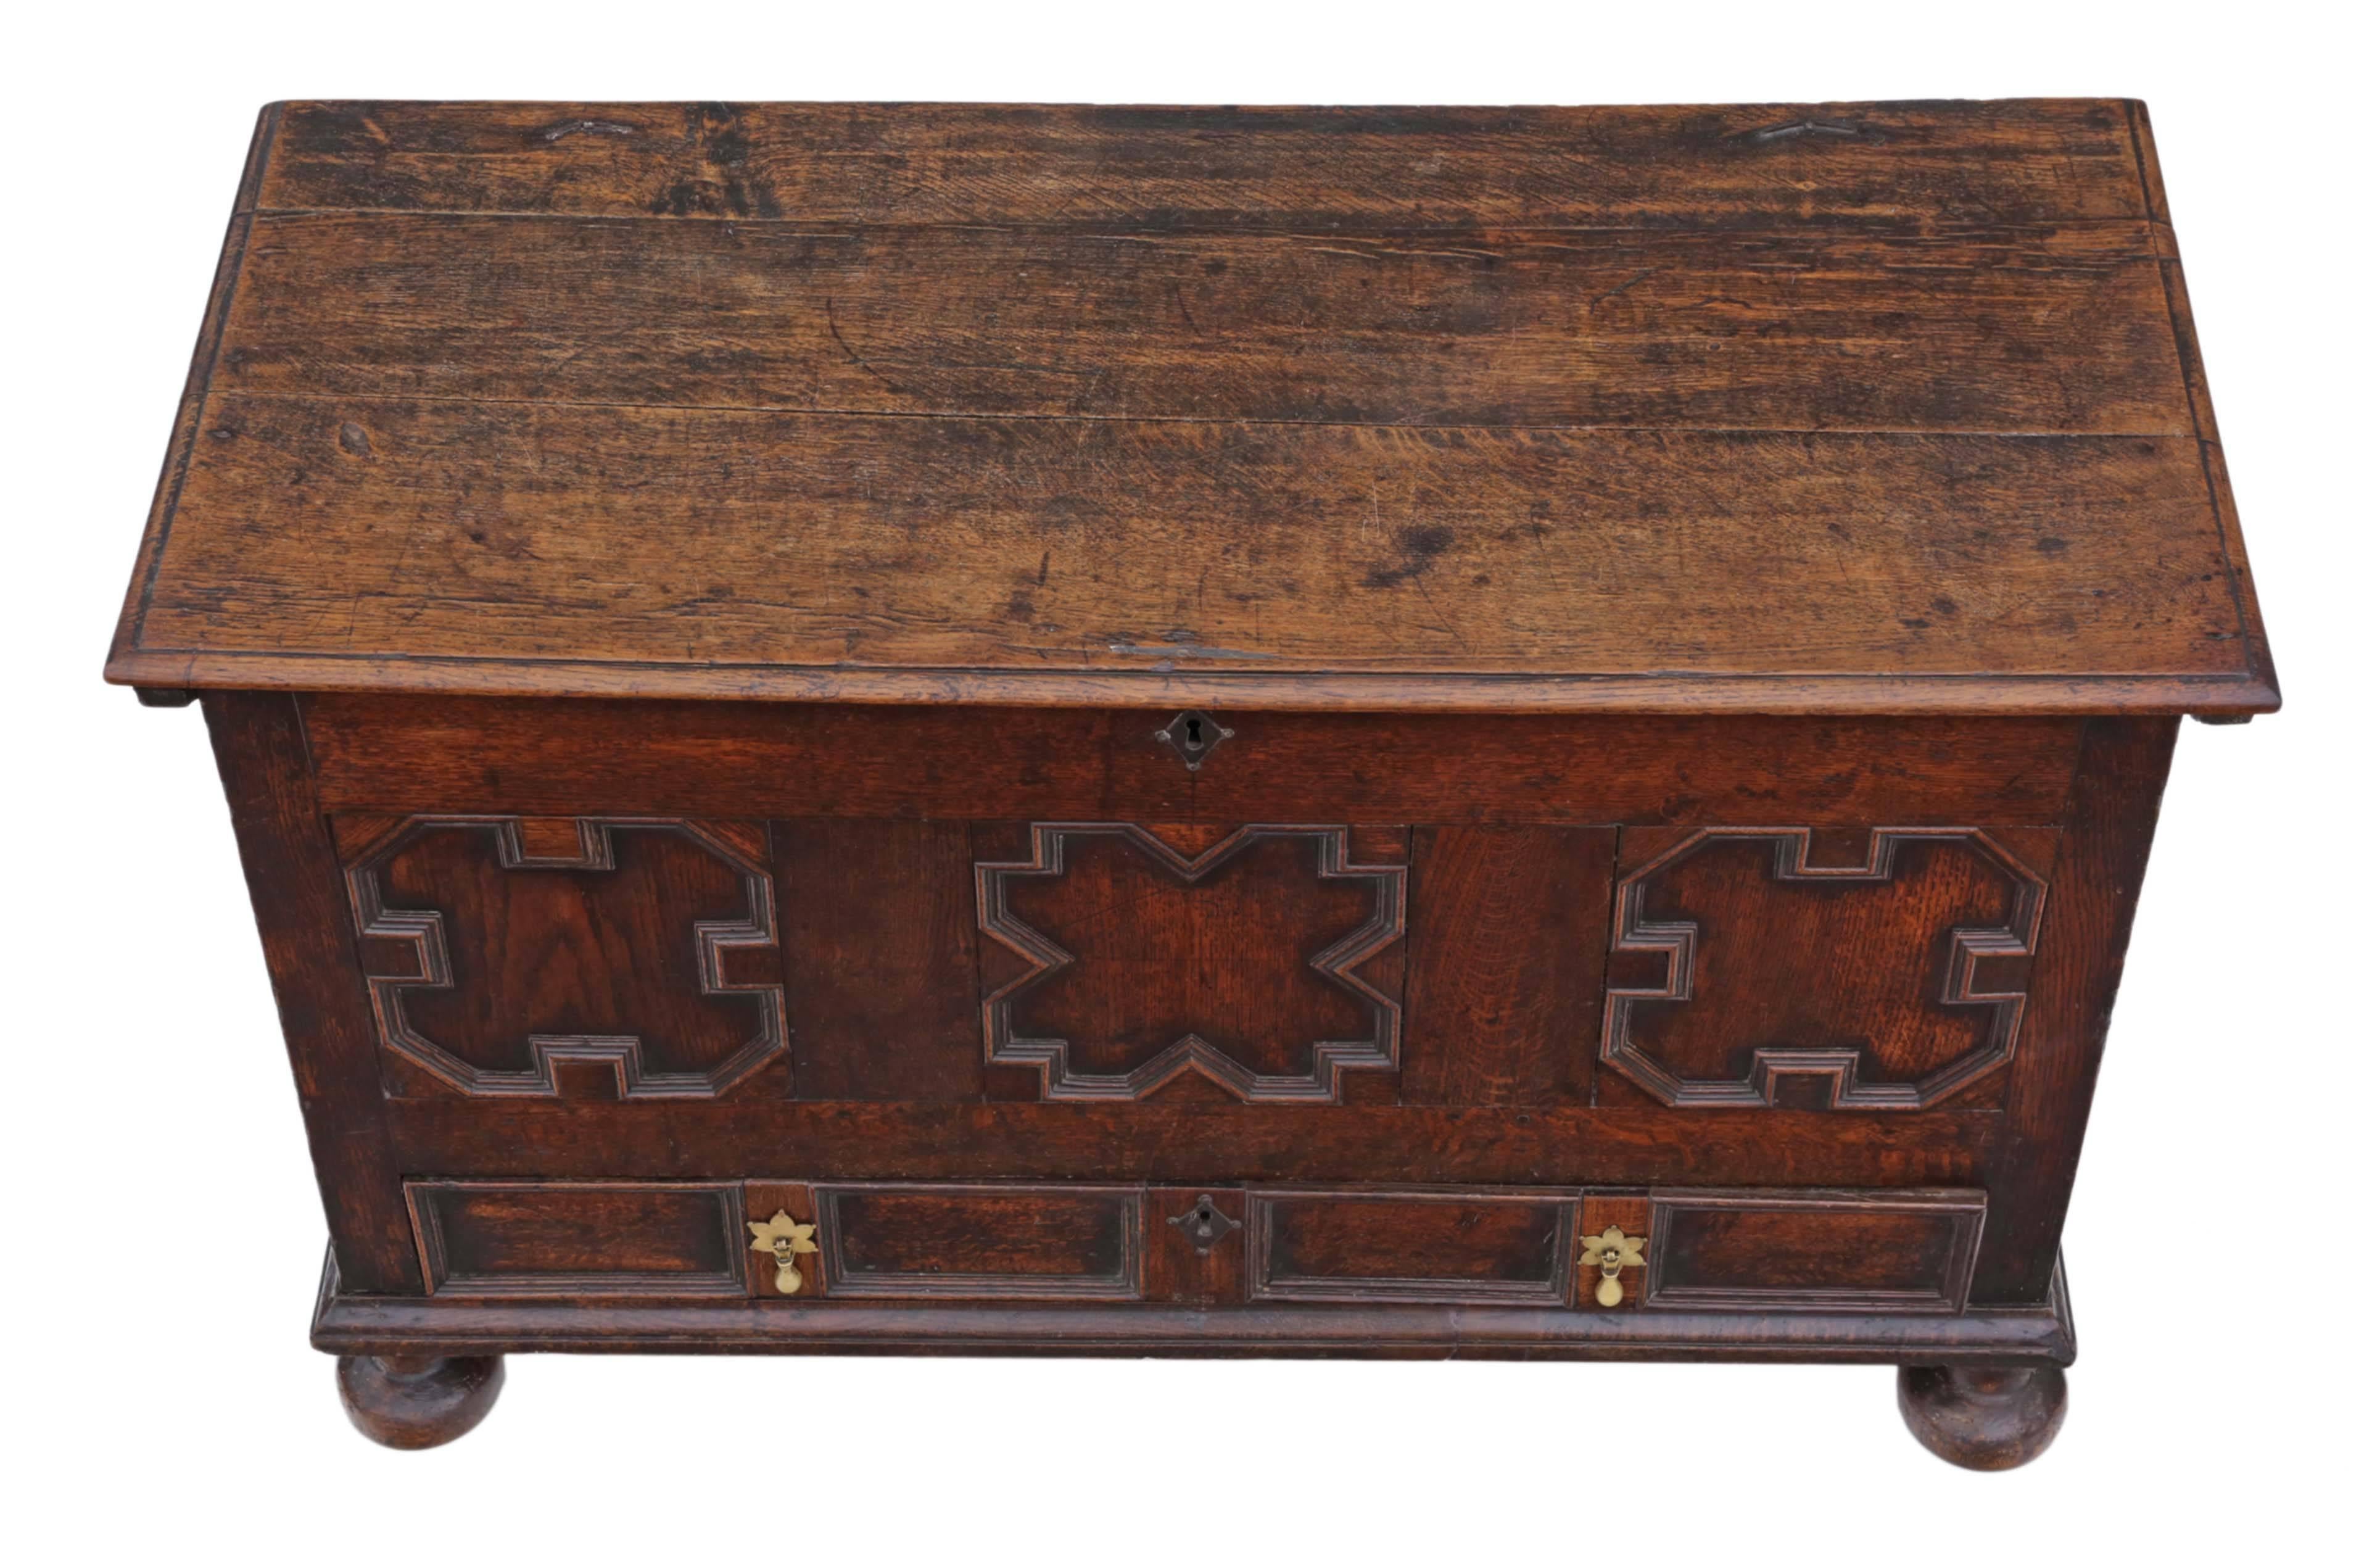 Antique 18th century Georgian oak coffer or mule chest.

Solid and strong, with no loose joints. Full of age, character and charm.

Would look great in the right location! The drawer slides freely.

Overall maximum dimensions: 132cm W x 60cm D